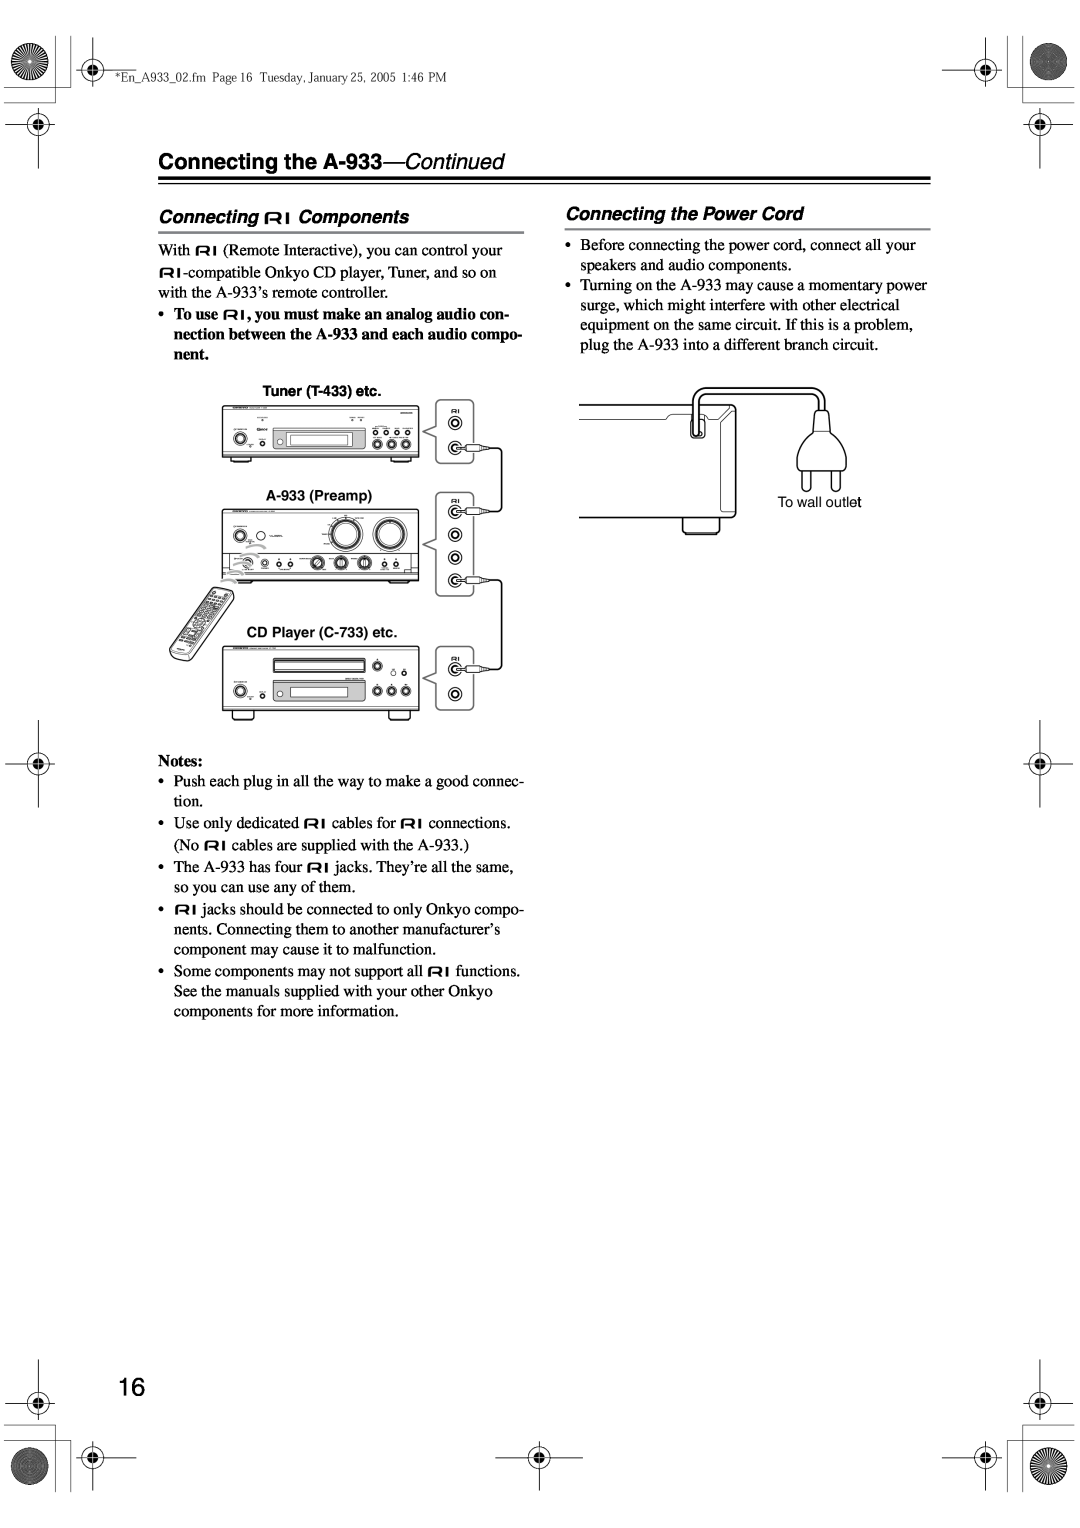 Onkyo instruction manual Connecting Components, Connecting the Power Cord, Connecting the A-933-Continued 